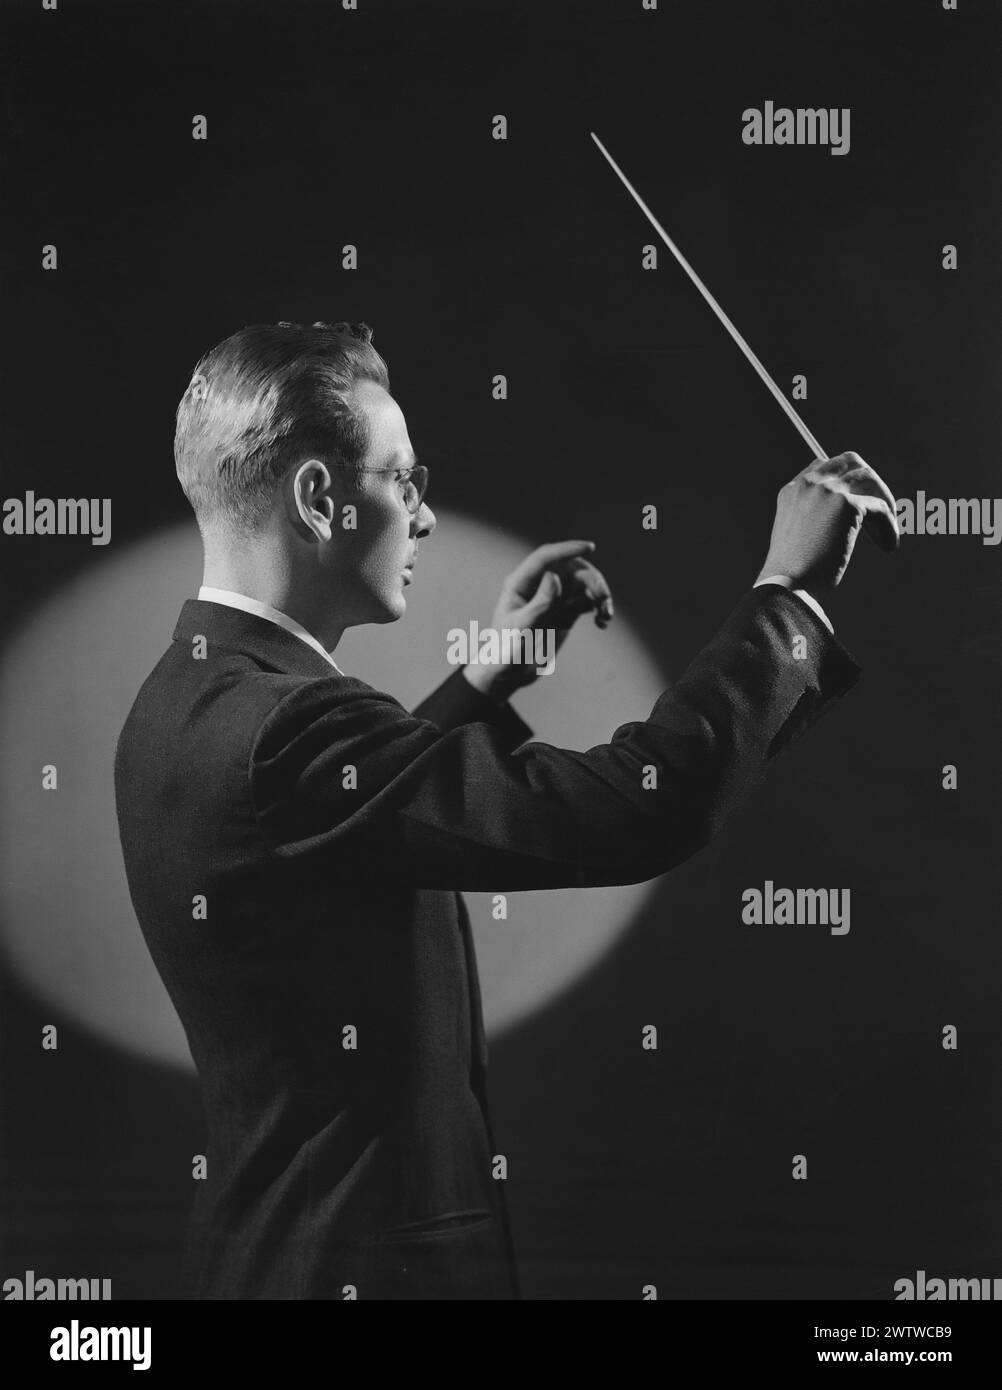 Dramatically lit male orchestra conductor shot from the side with a spotlight lighting him and the background while he has his hands in the air and waving a baton. Stock Photo